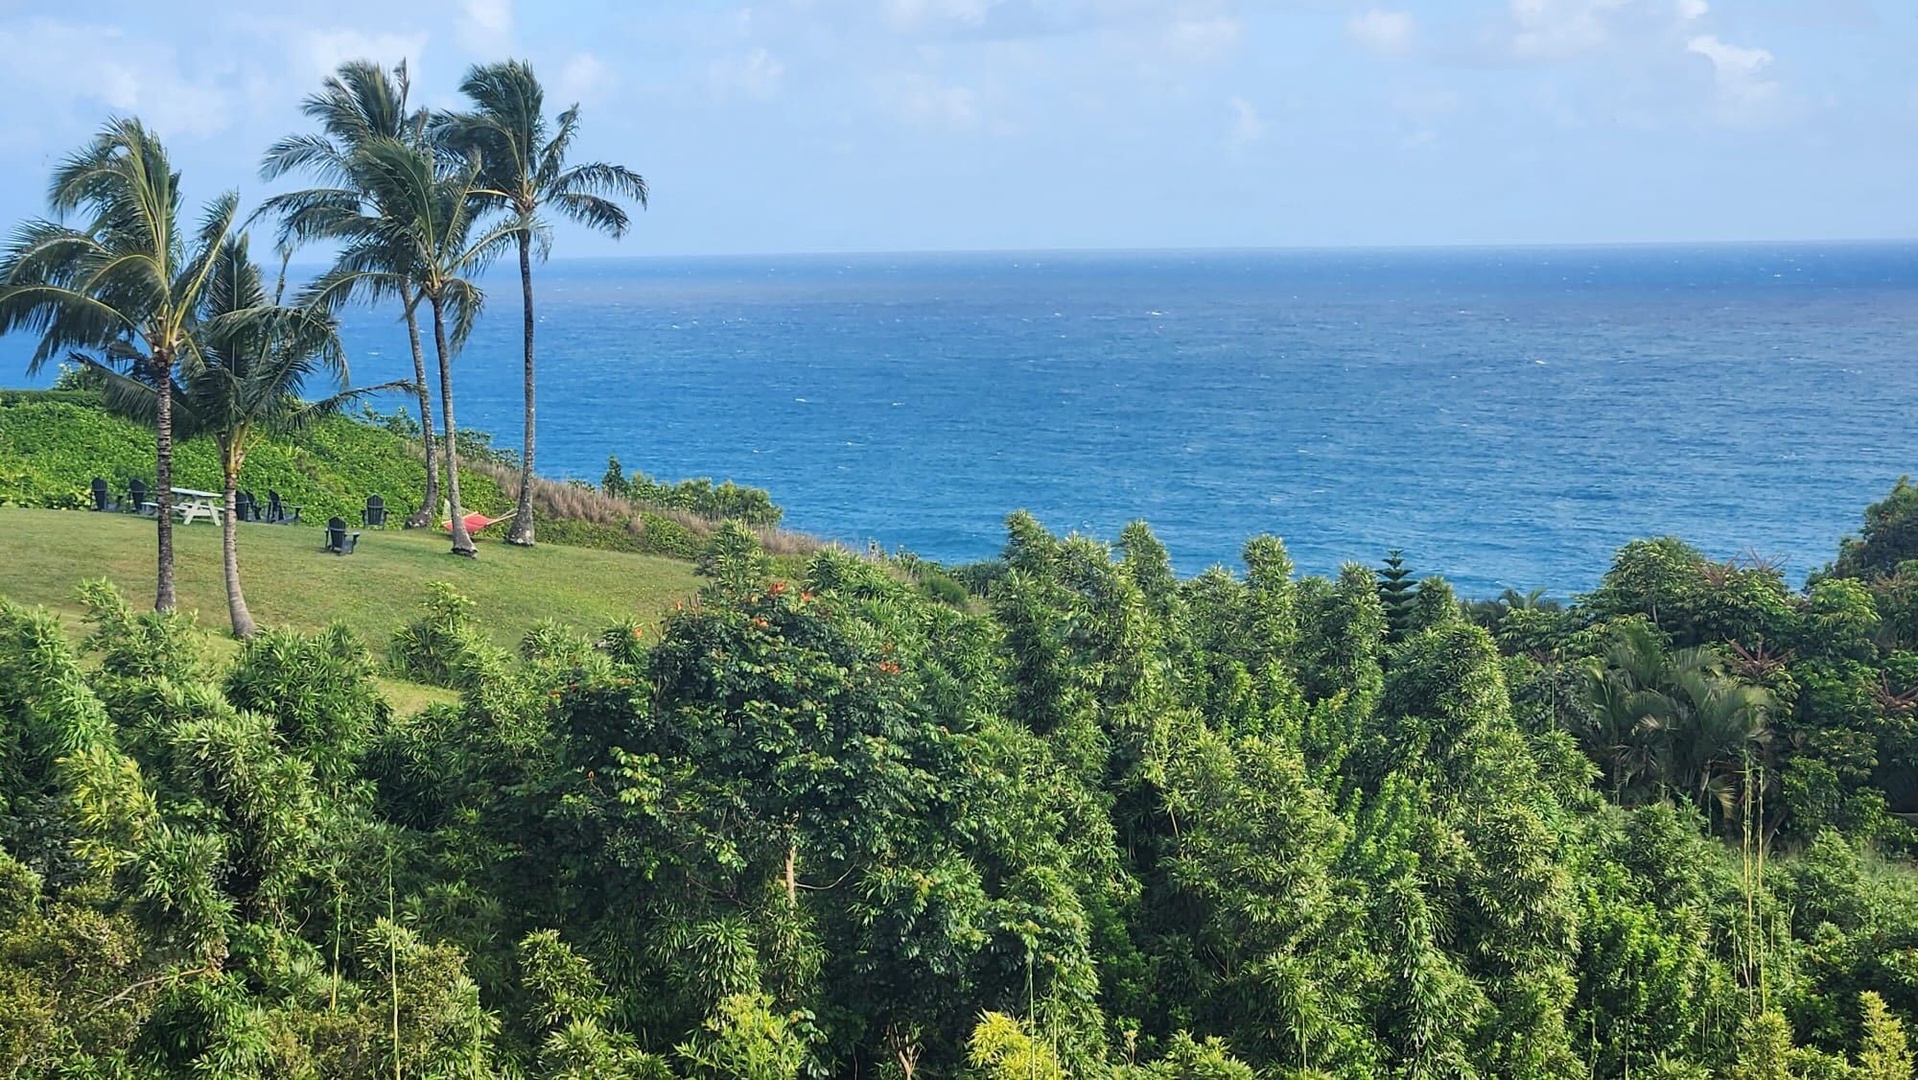 Princeville Vacation Rentals, Wai Lani - Ocean Views From The House.